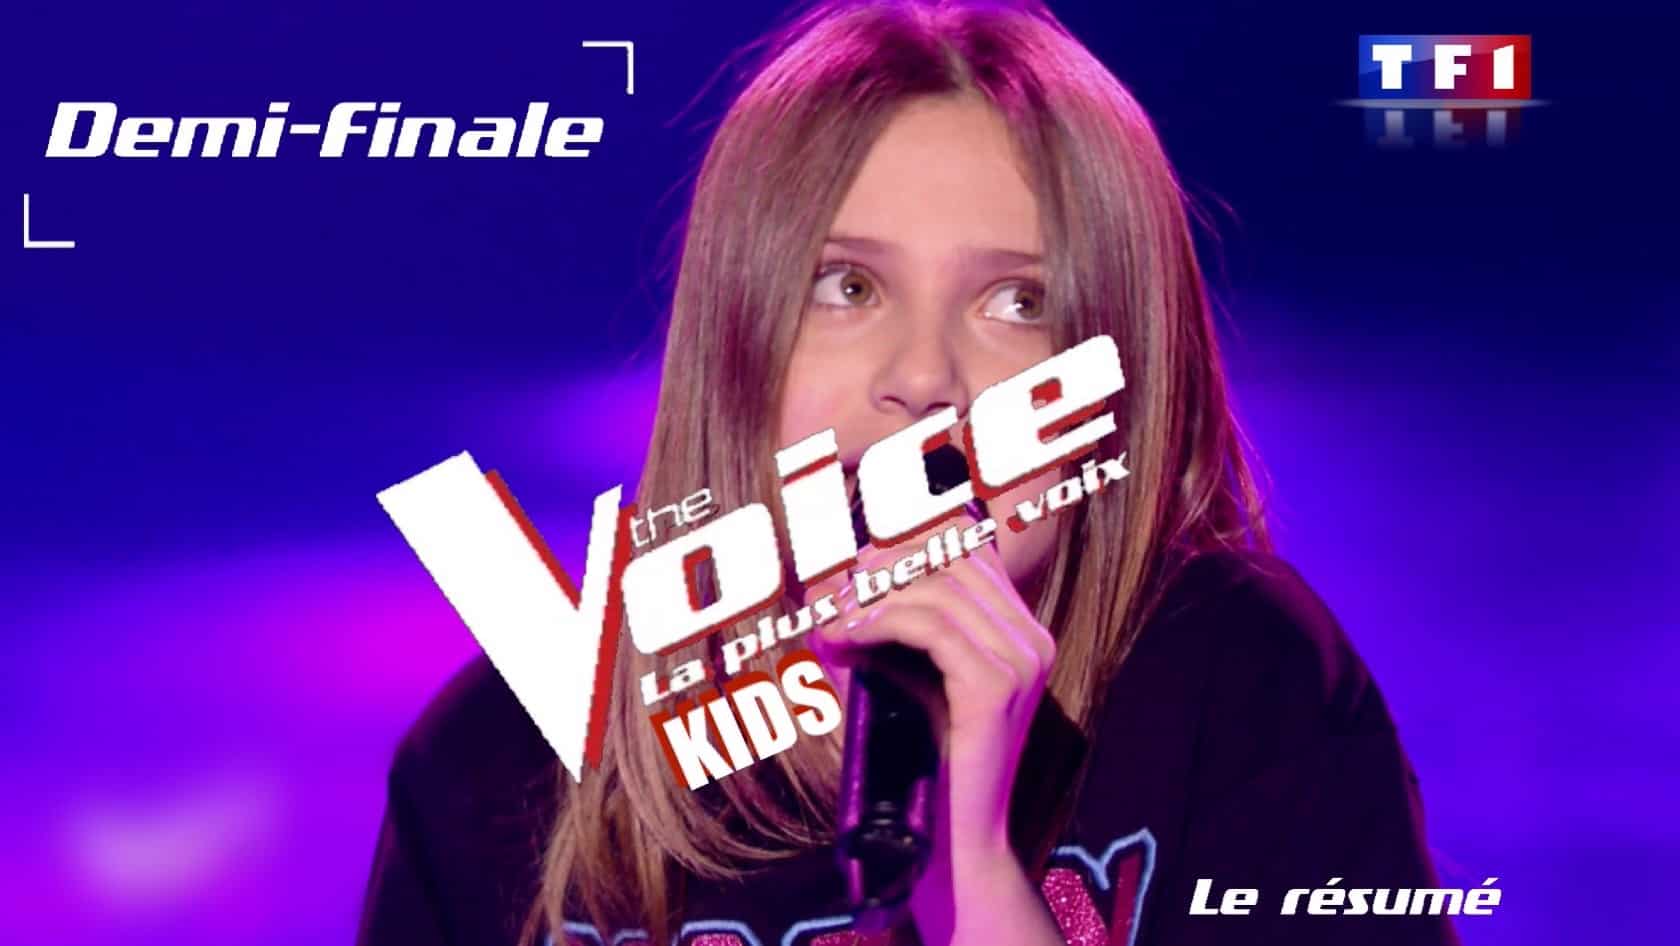 The Voice Kids 5 : La Demi-Finale - ©/-\ll in One TV, All rights reserved. Do not copy. Reproduction Interdite